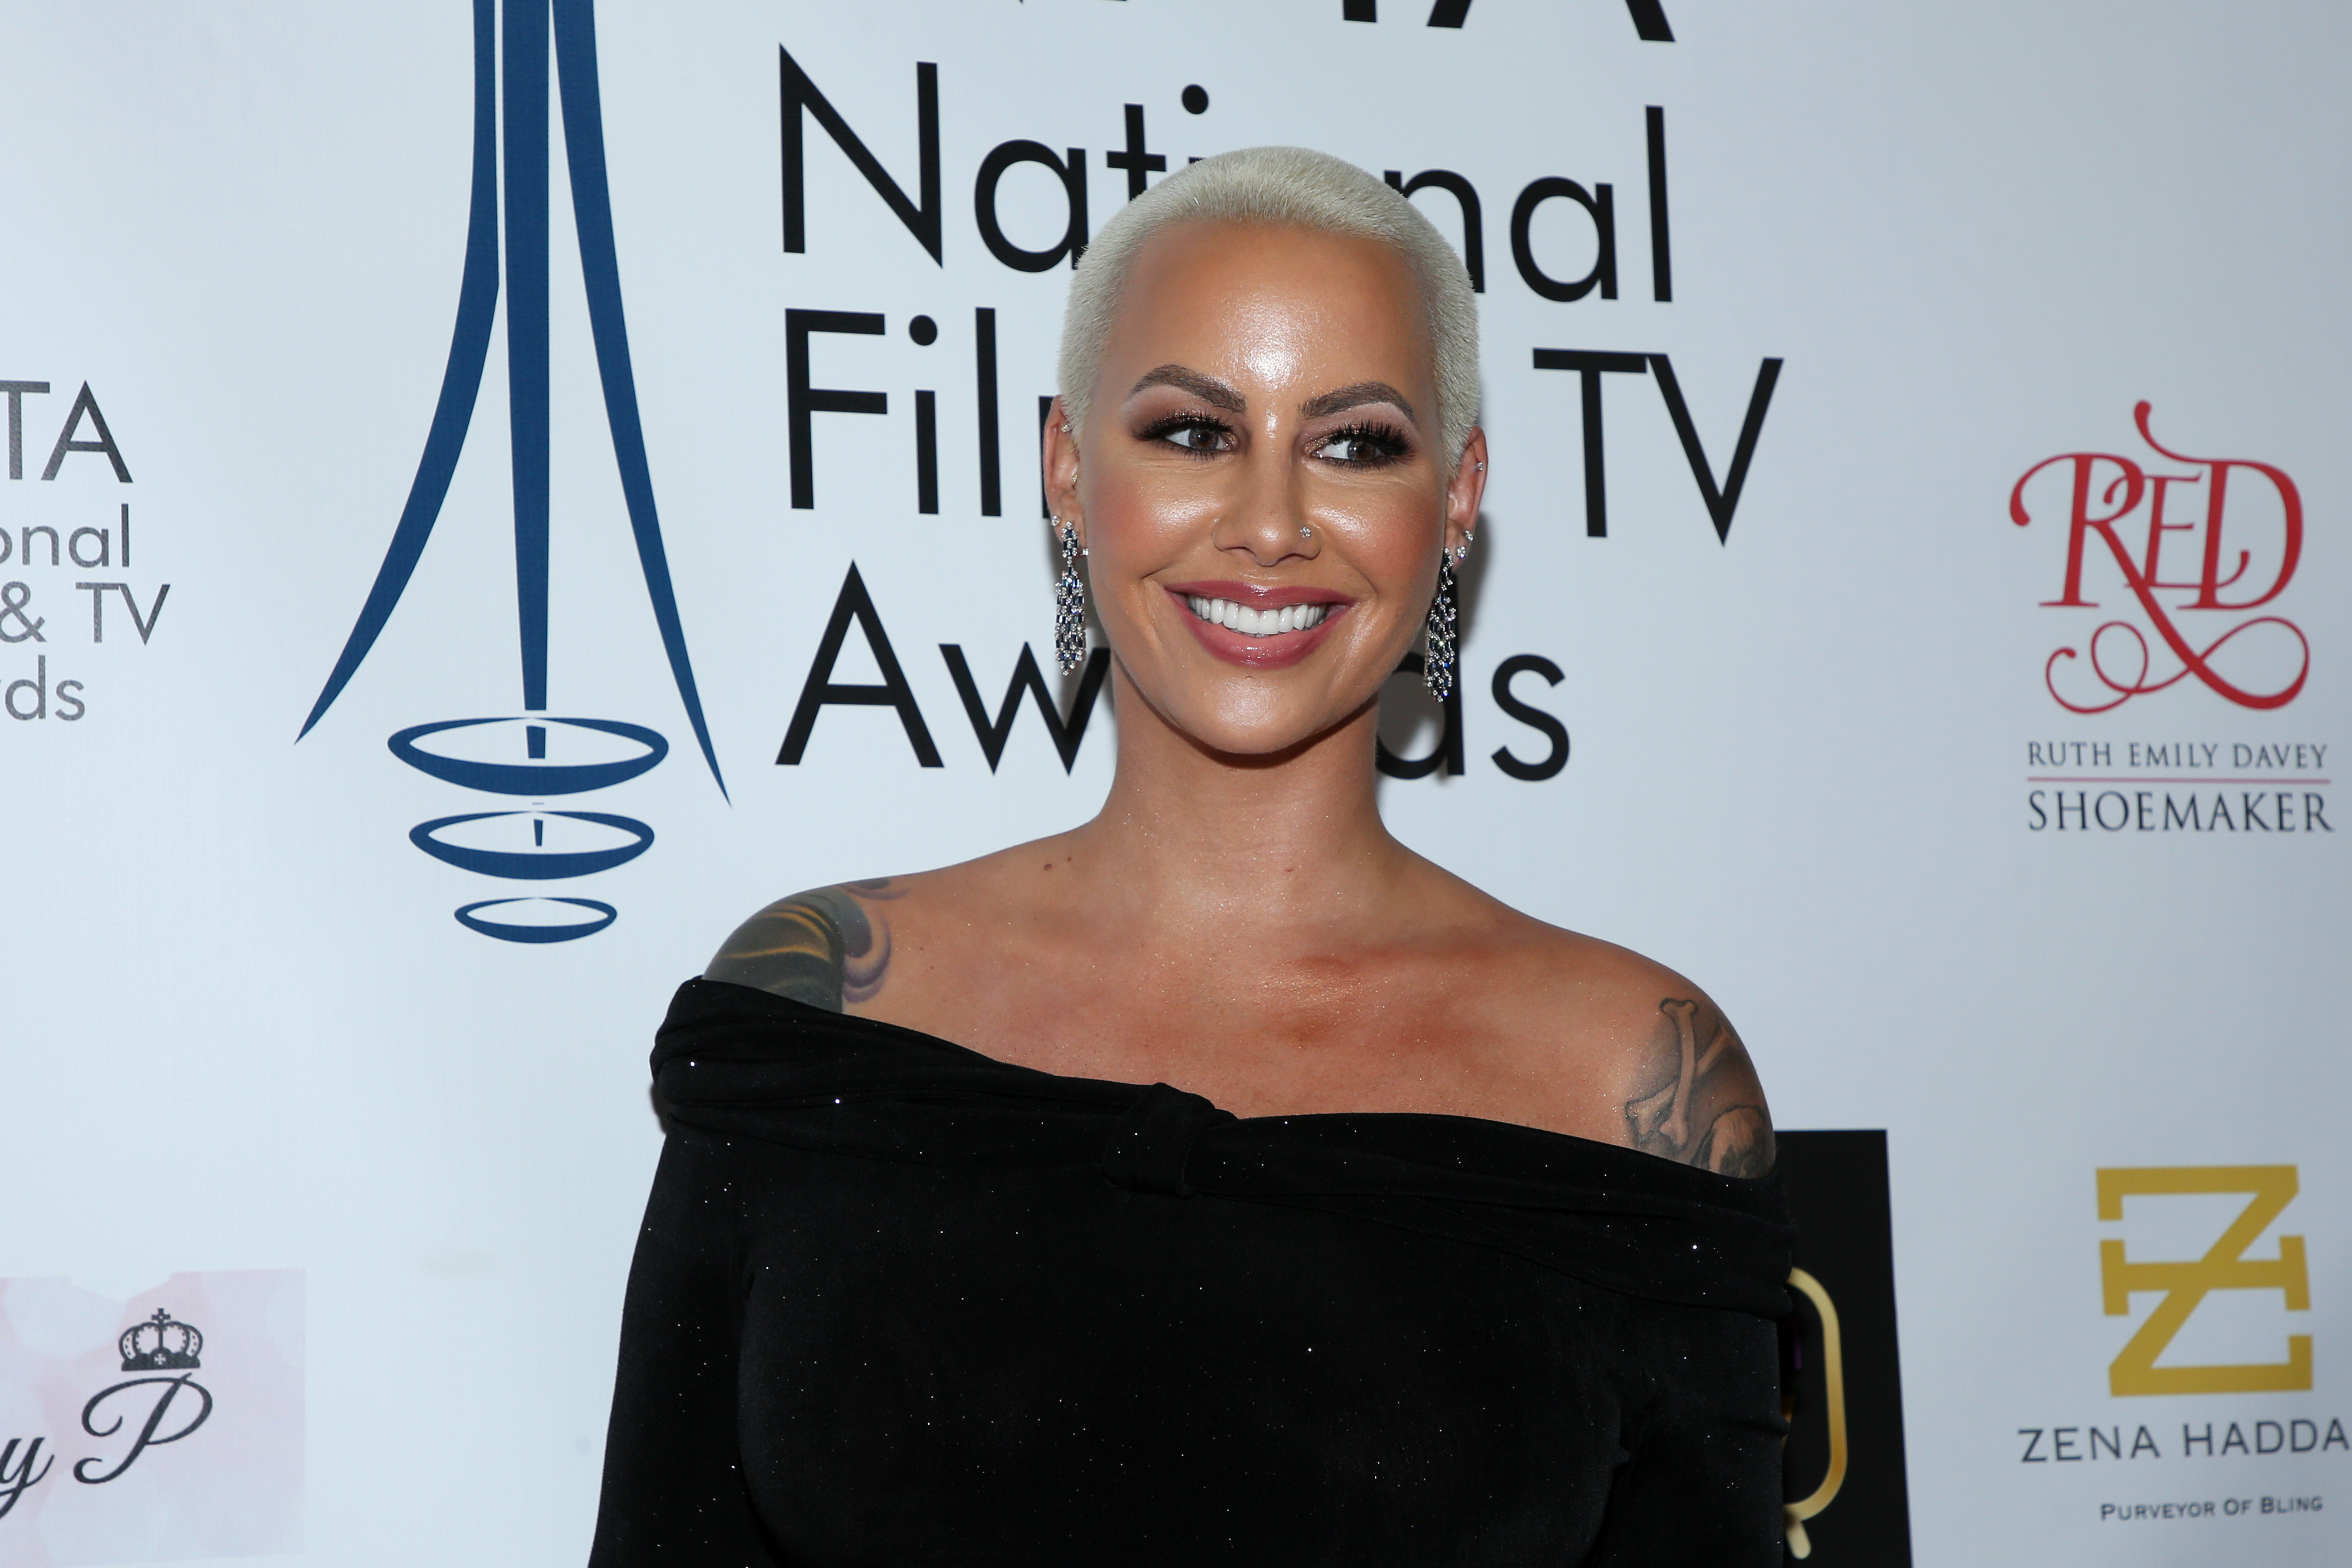 Amber Rose Gets Giant Forehead Tattoos in Honor of Her Sons Pics